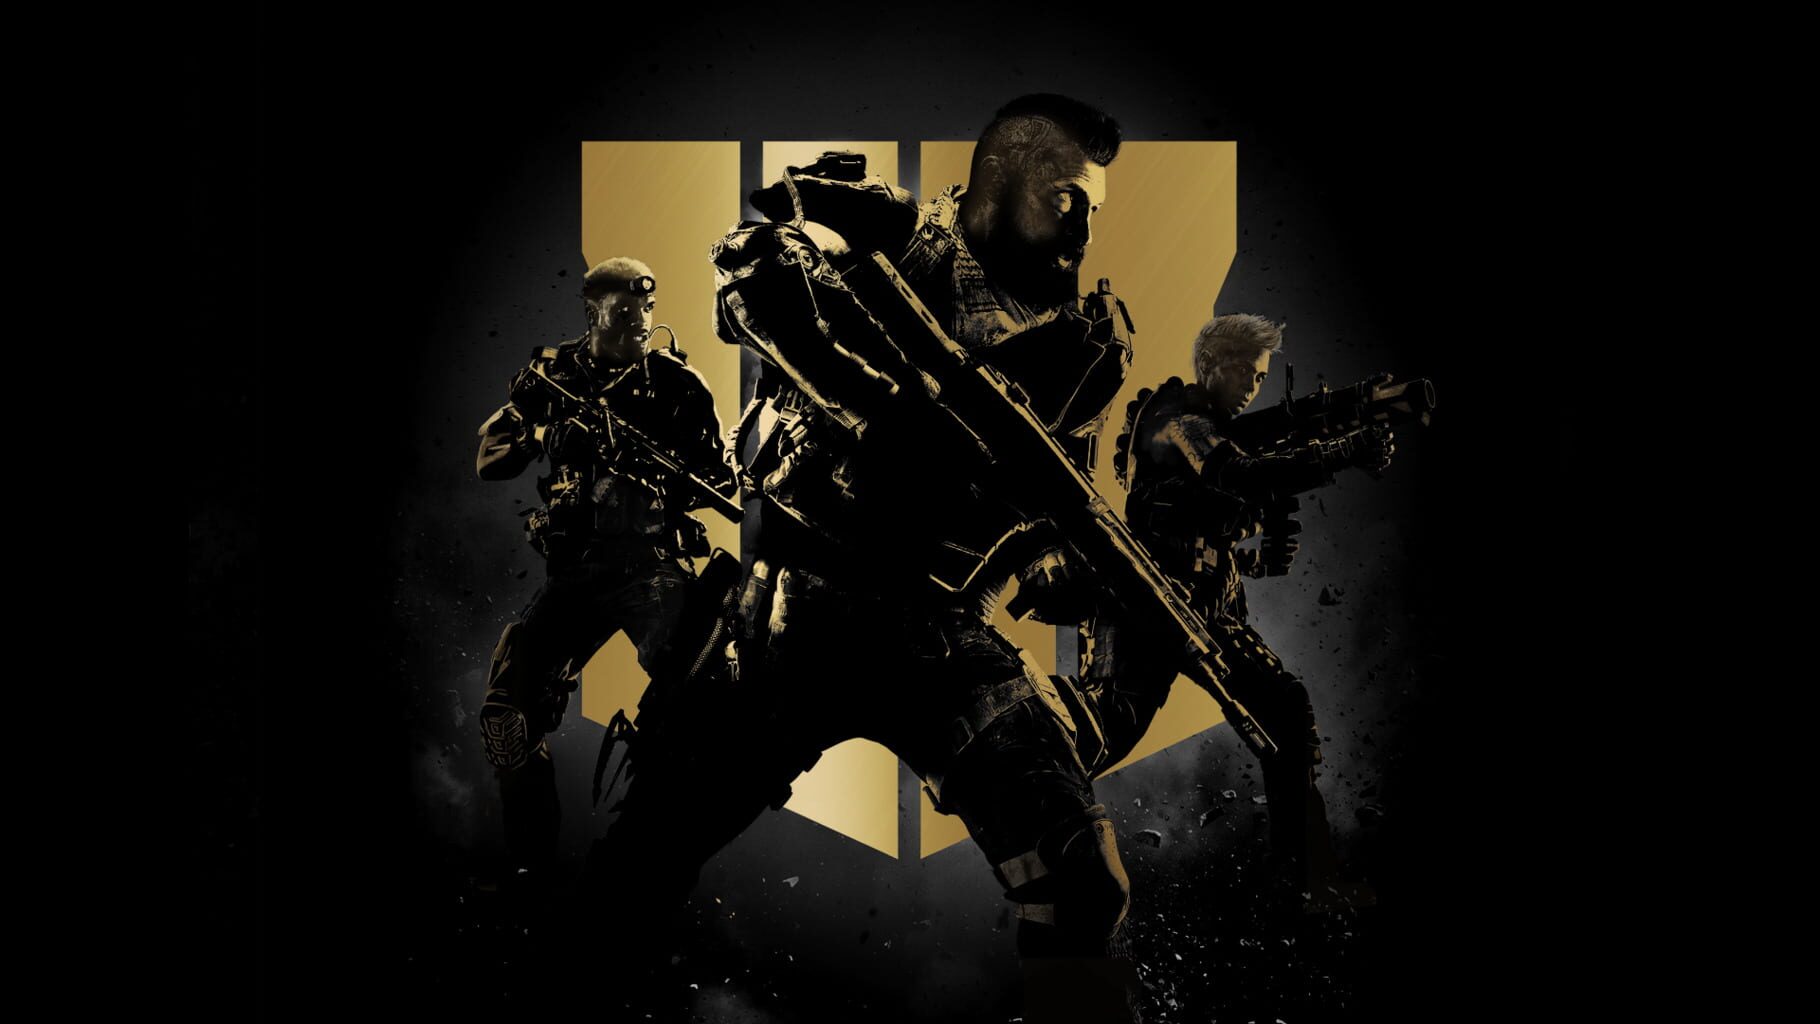 Call of Duty: Black Ops 4 Image